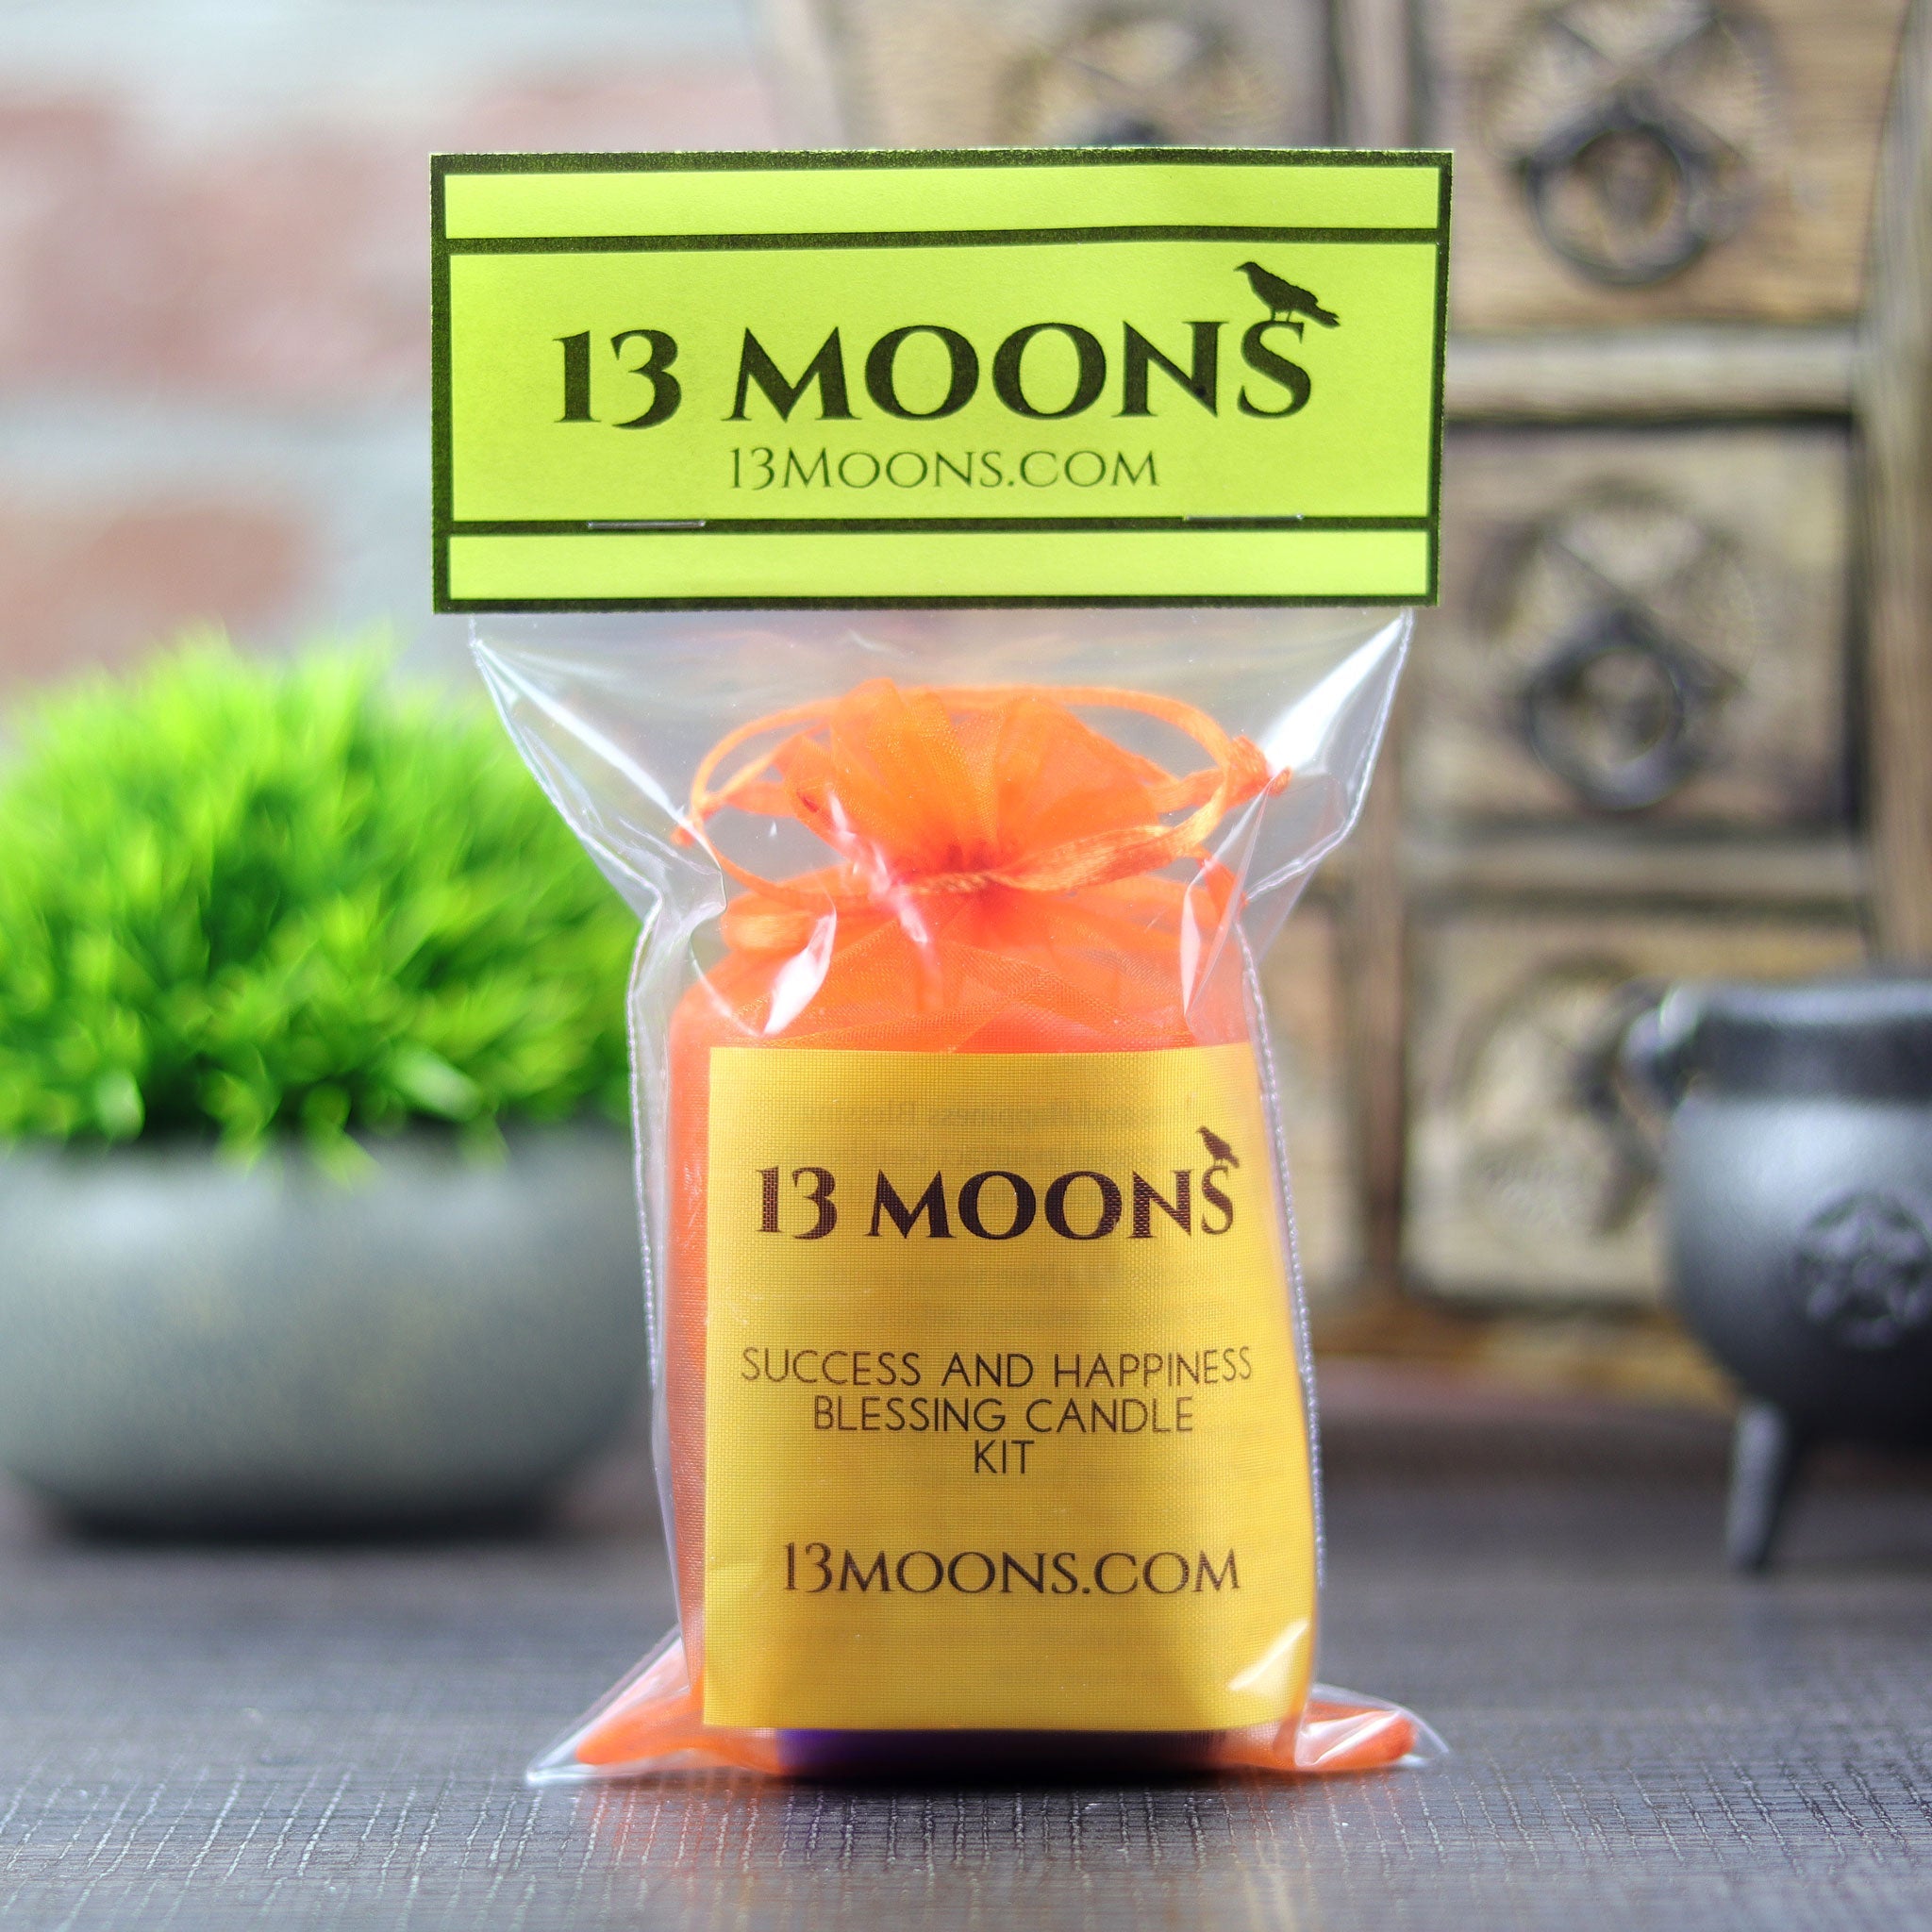 Success and Happiness Blessing Candle Kit - 13 Moons